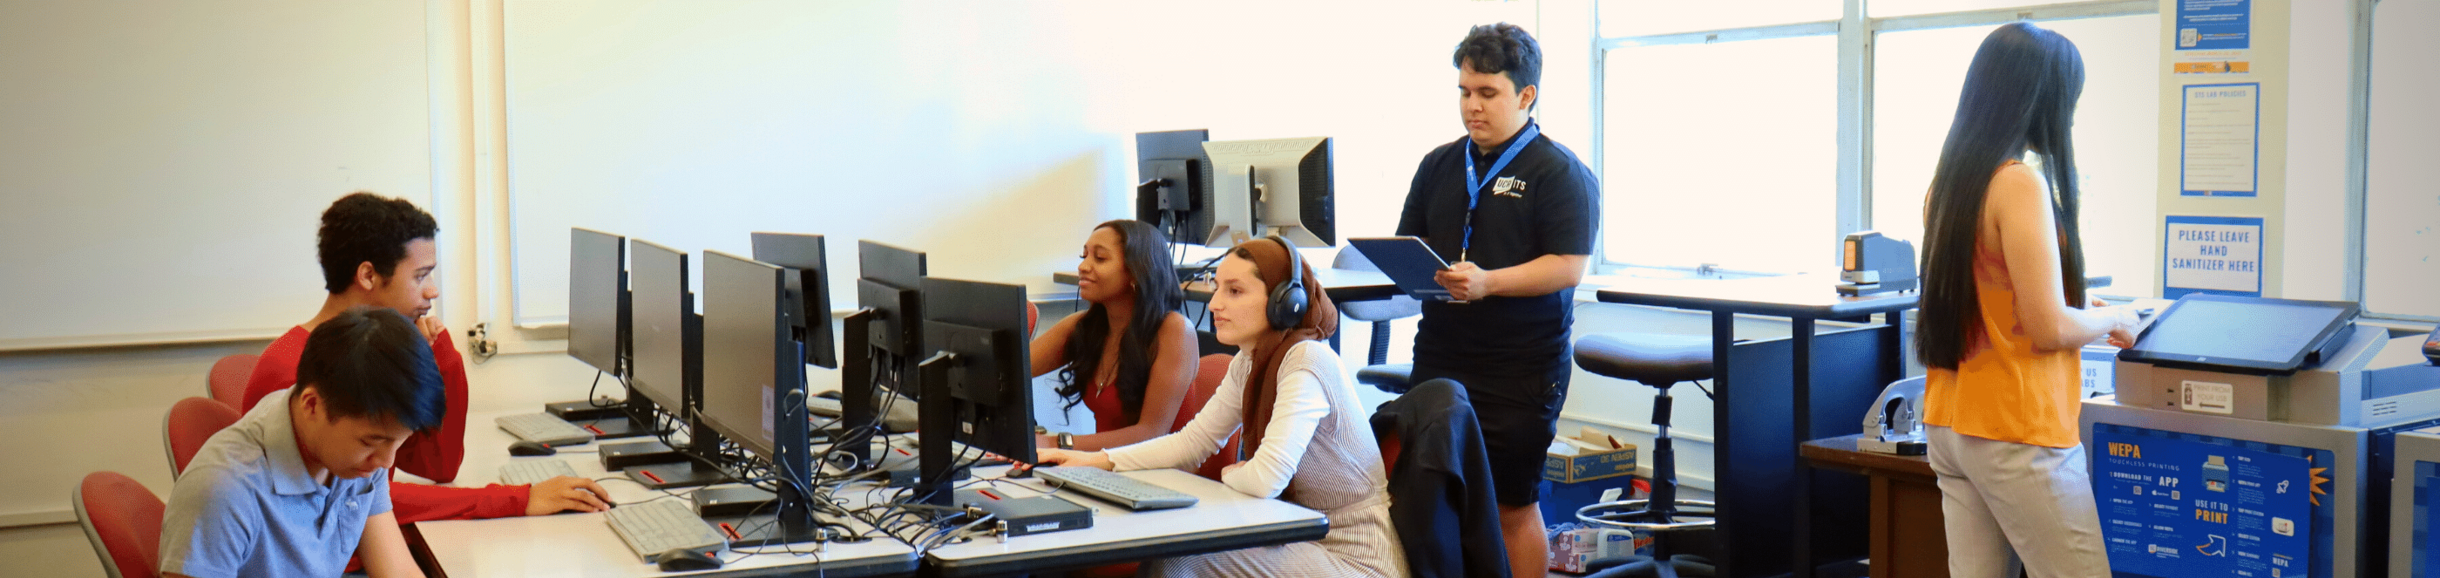 students use ITS printer and computer lab 